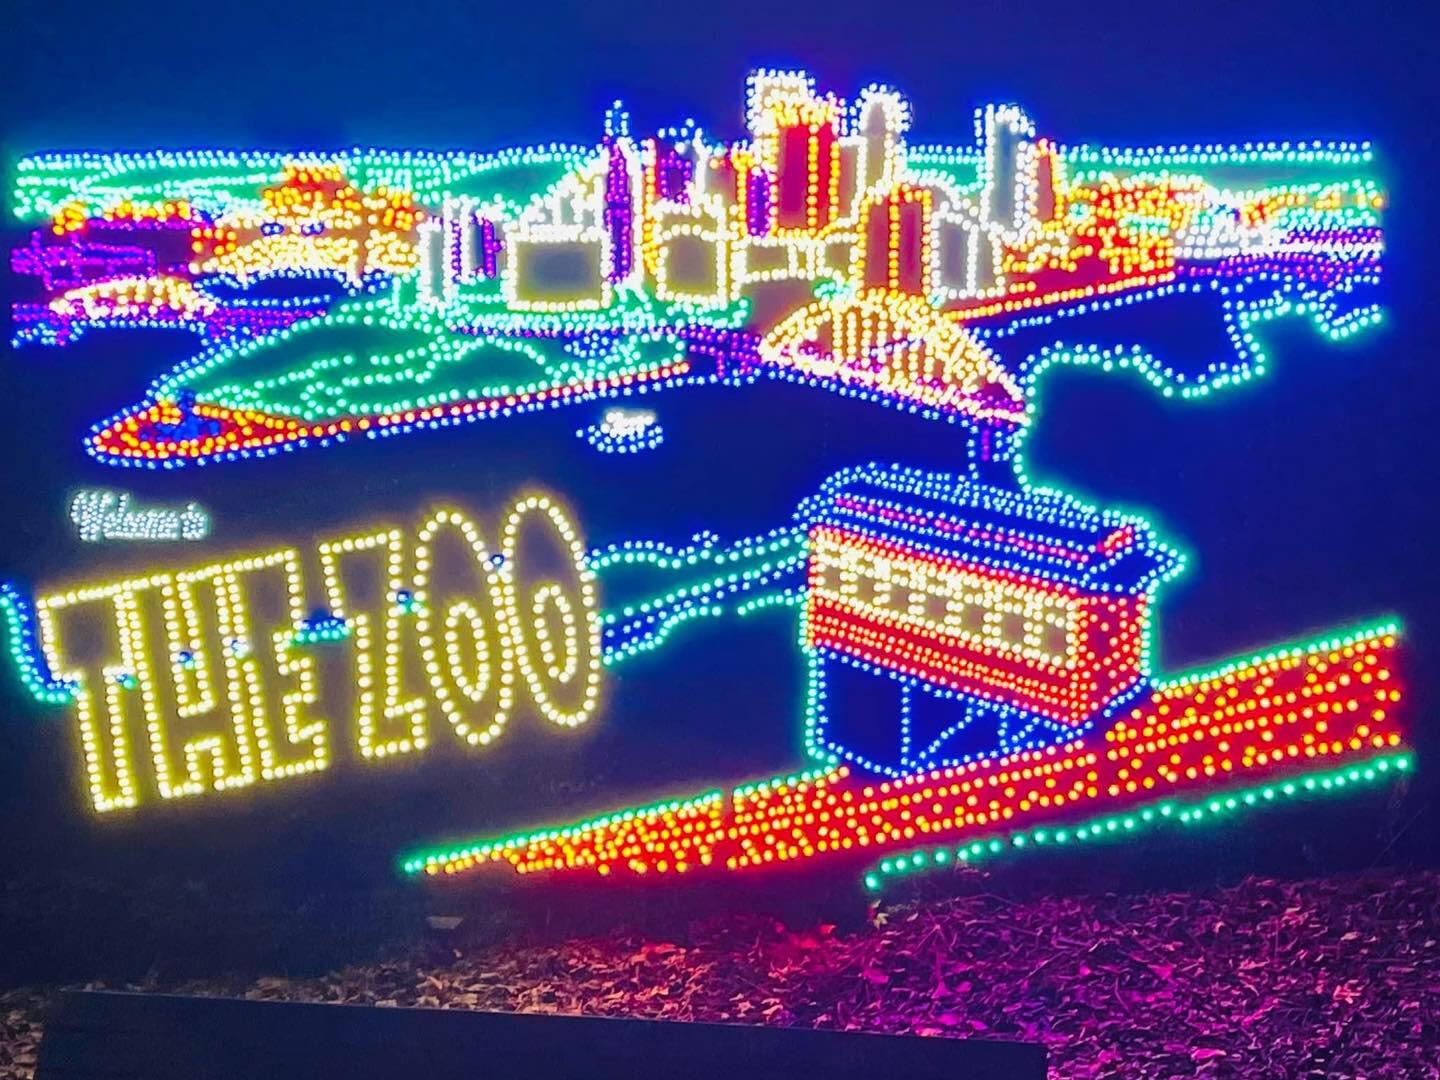 A light up display showing the Pittsburgh skyline